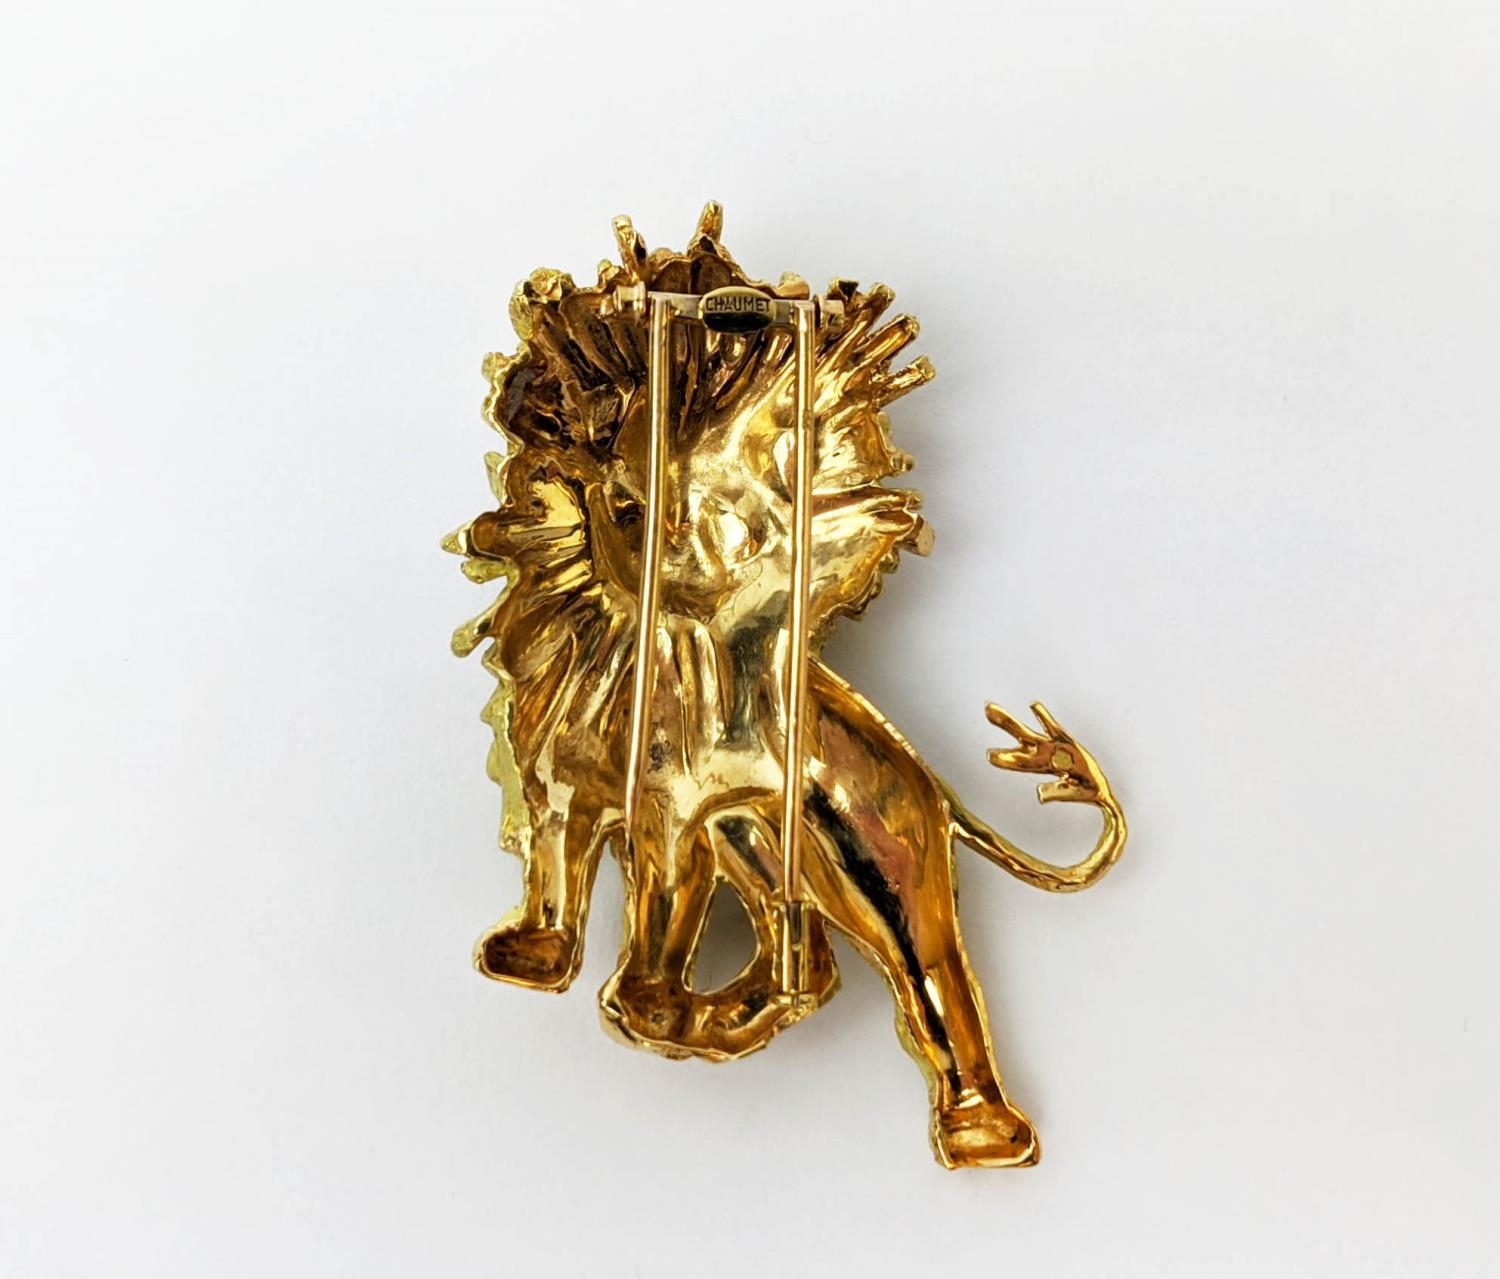 AN 18CT GOLD 'CHAUMET' LION BROOCH, textured finish, made in parts, 33.38 grams, probably 1970s. - Image 2 of 9